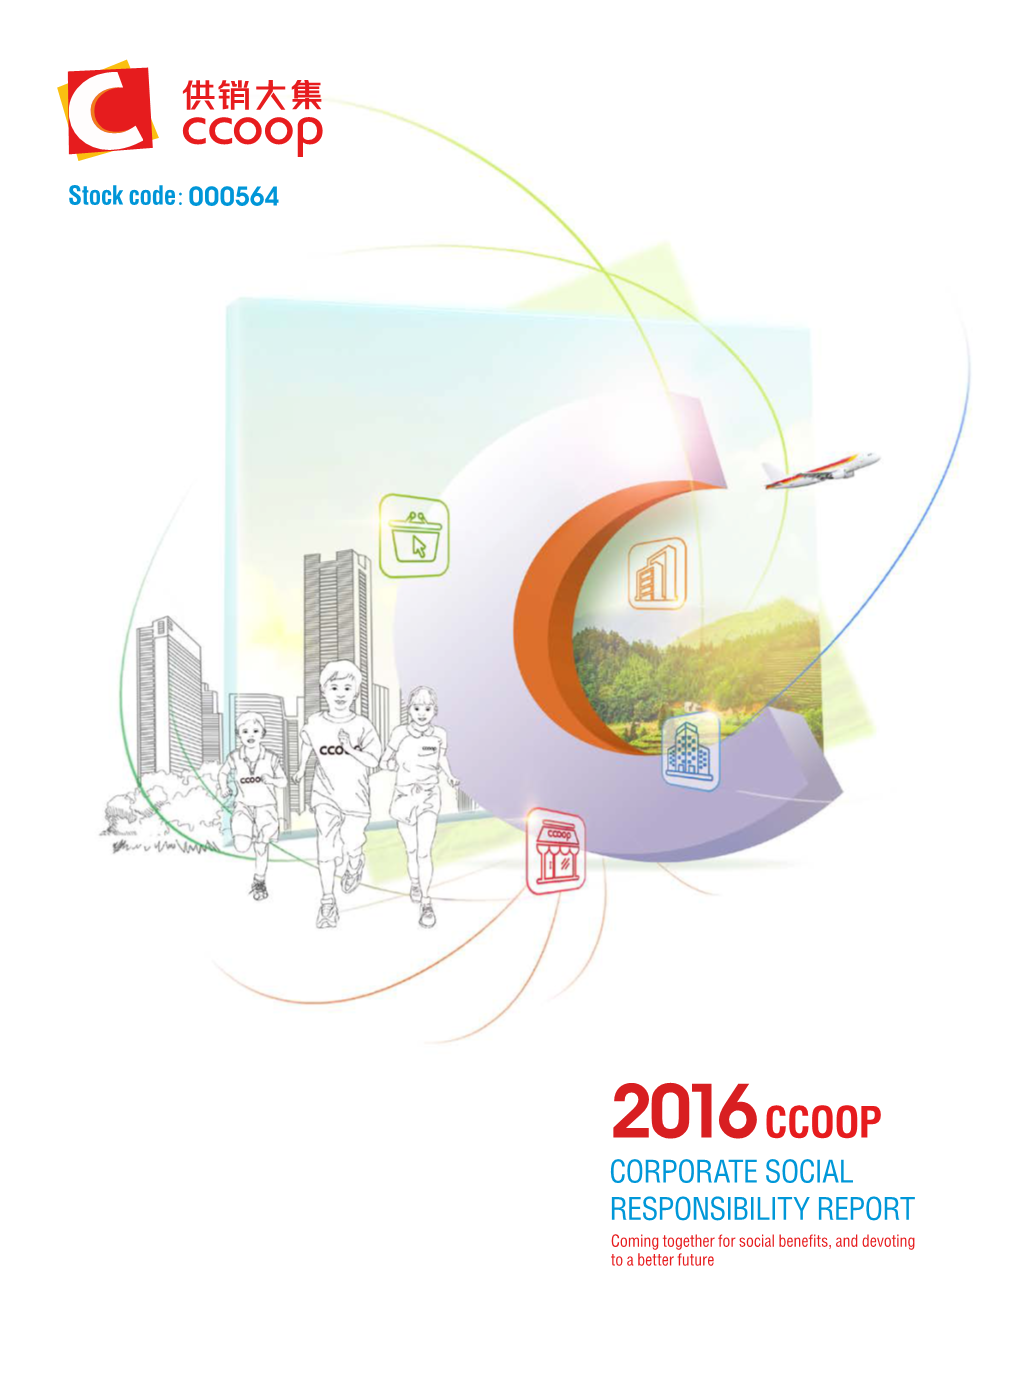 CCOOP CORPORATE SOCIAL RESPONSIBILITY REPORT Coming Together for Social Benefits, and Devoting to a Better Future Contents